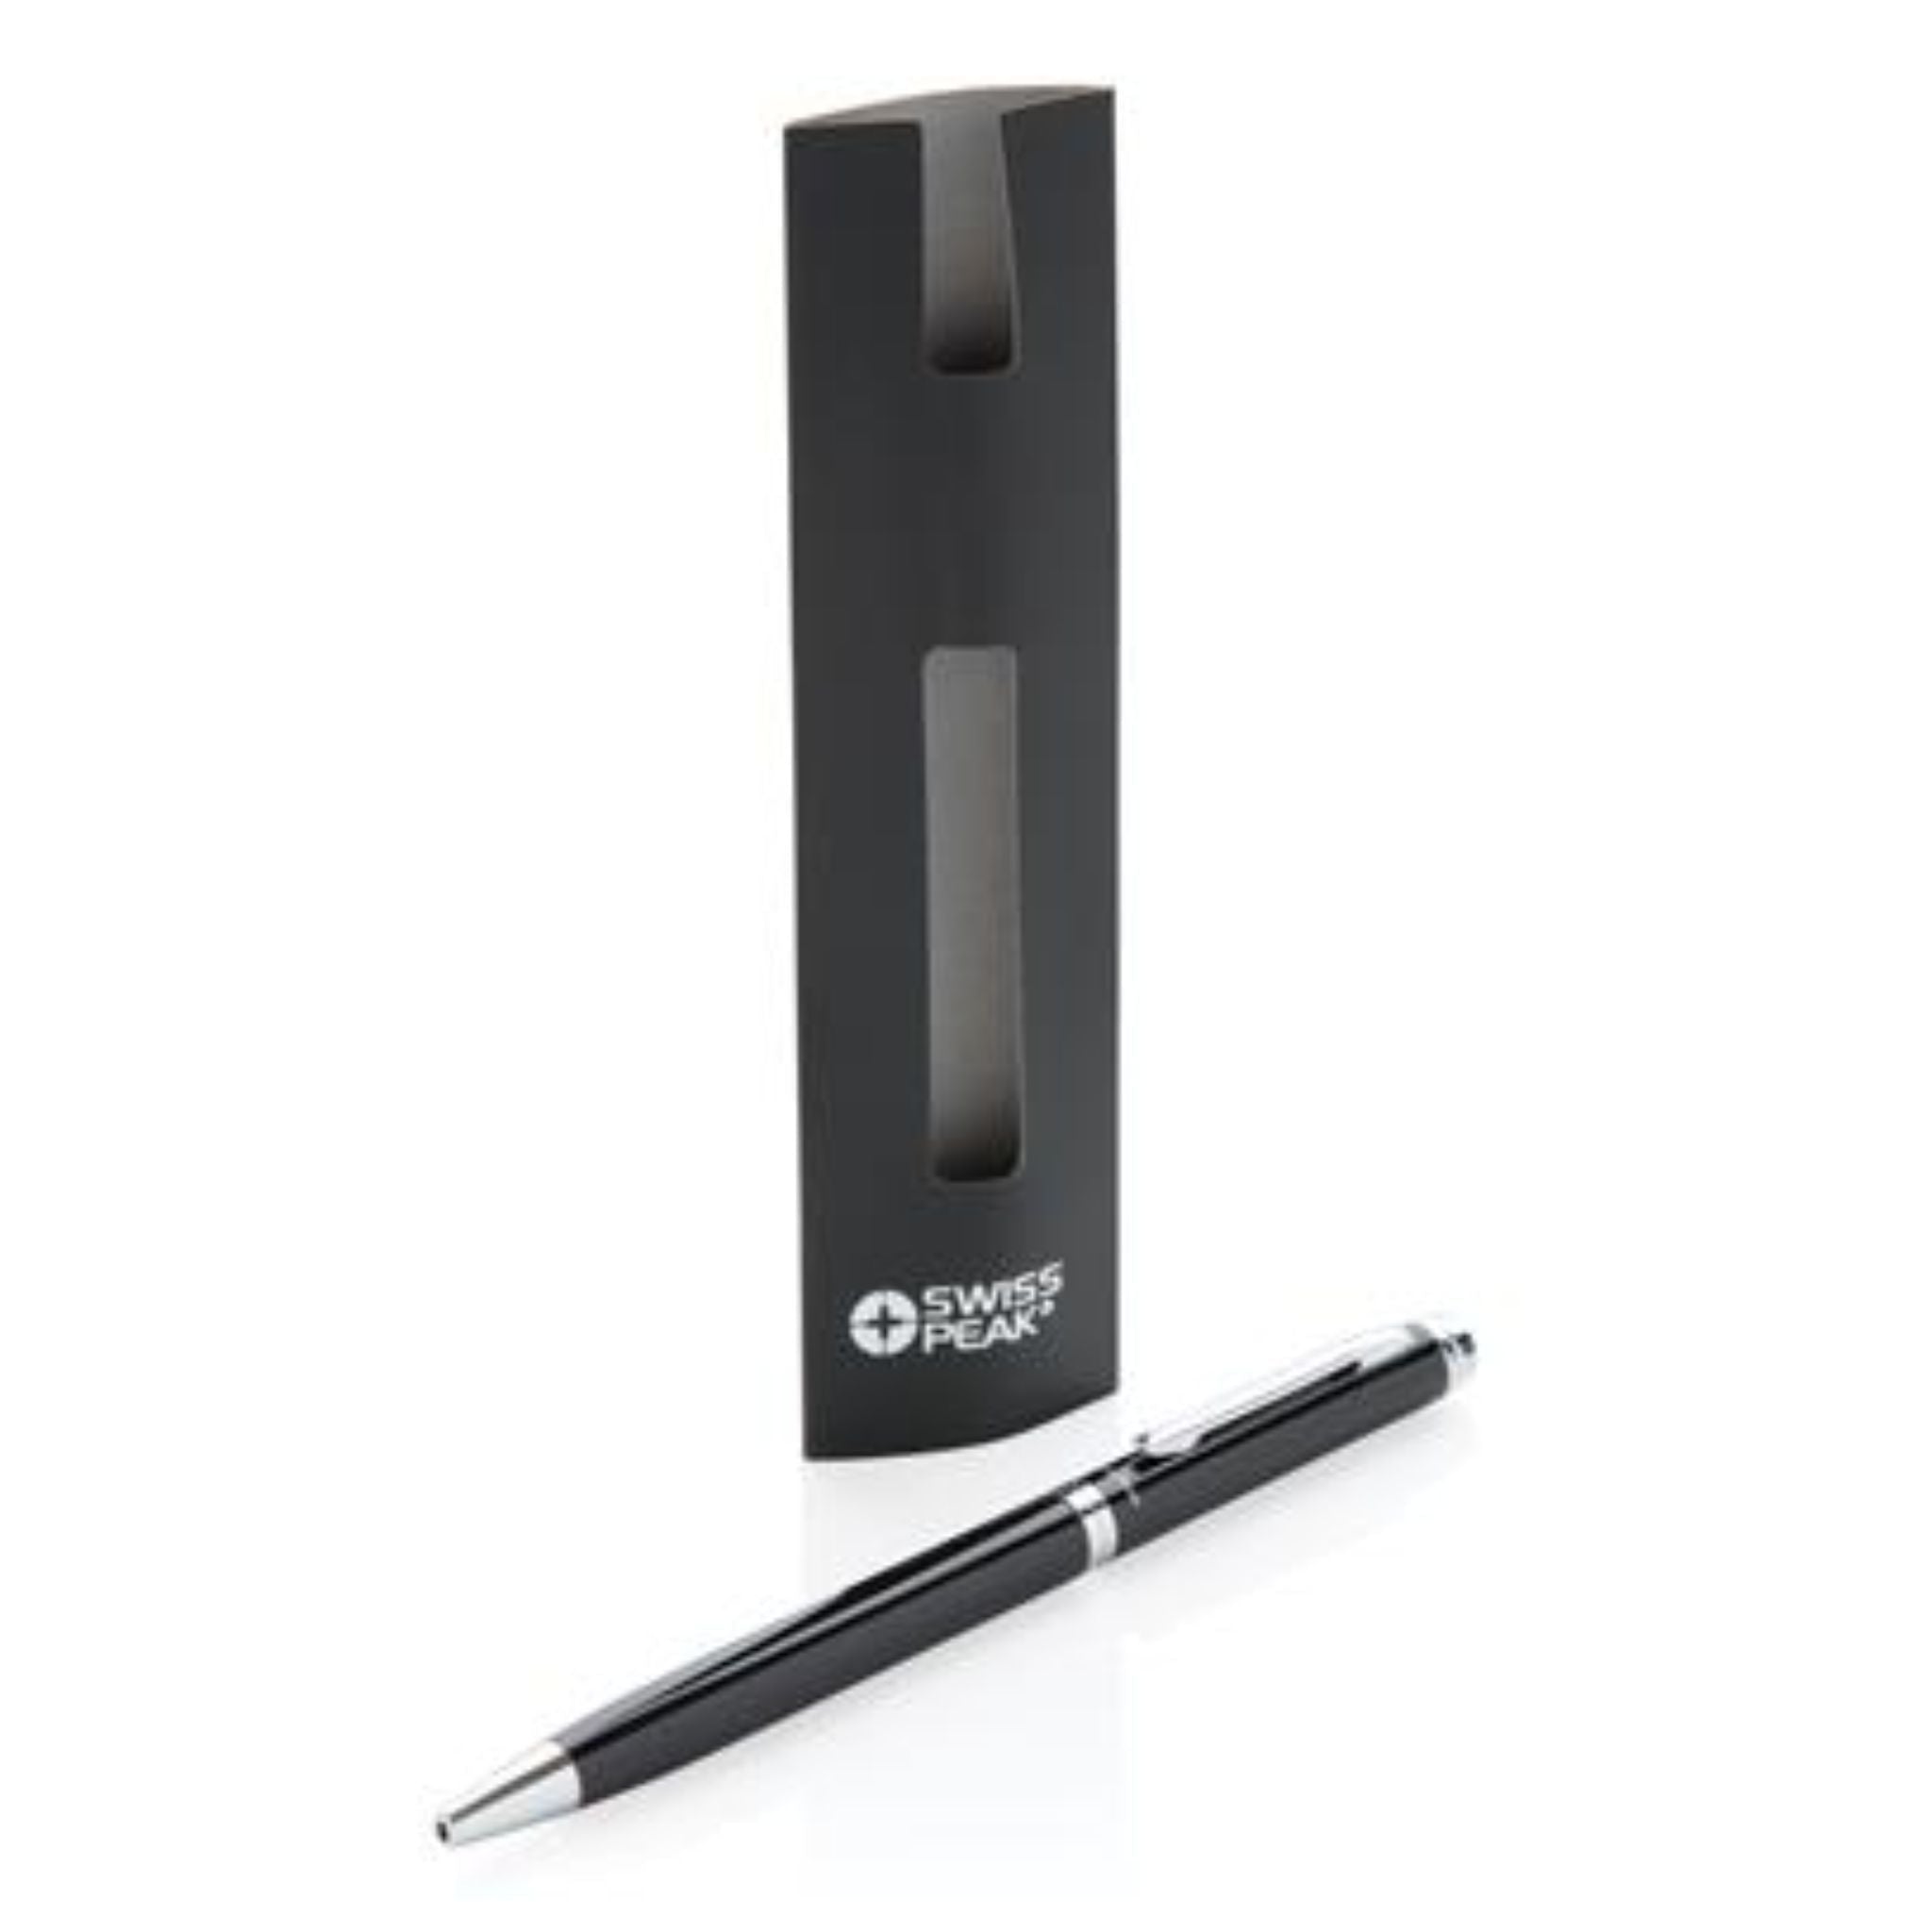 Black and silver pen showing its packaging puch